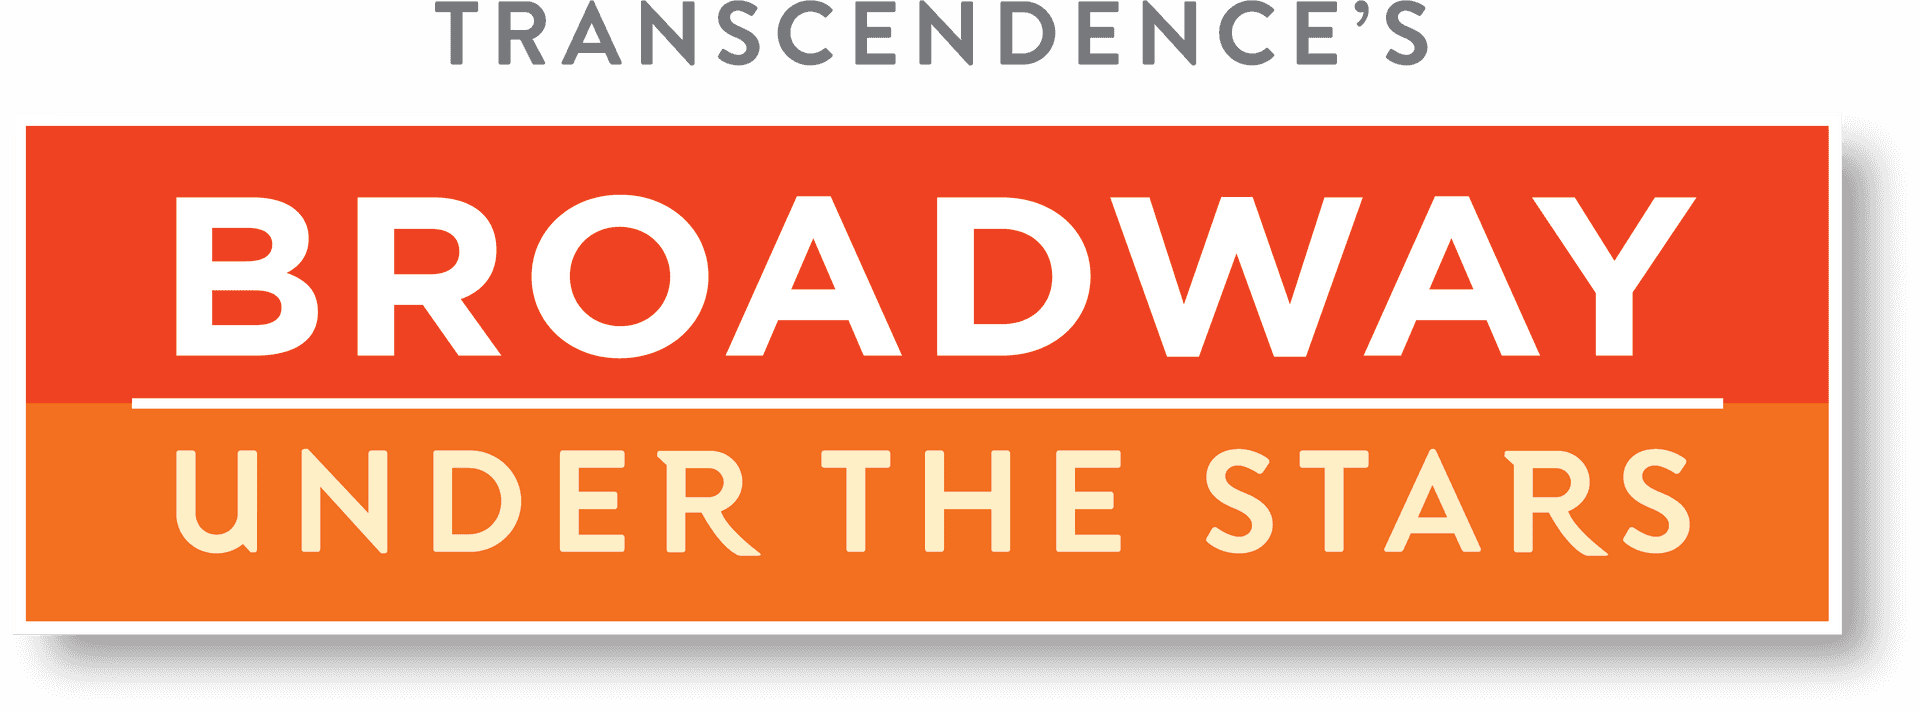 Broadway Under The Stars Signage PNG image